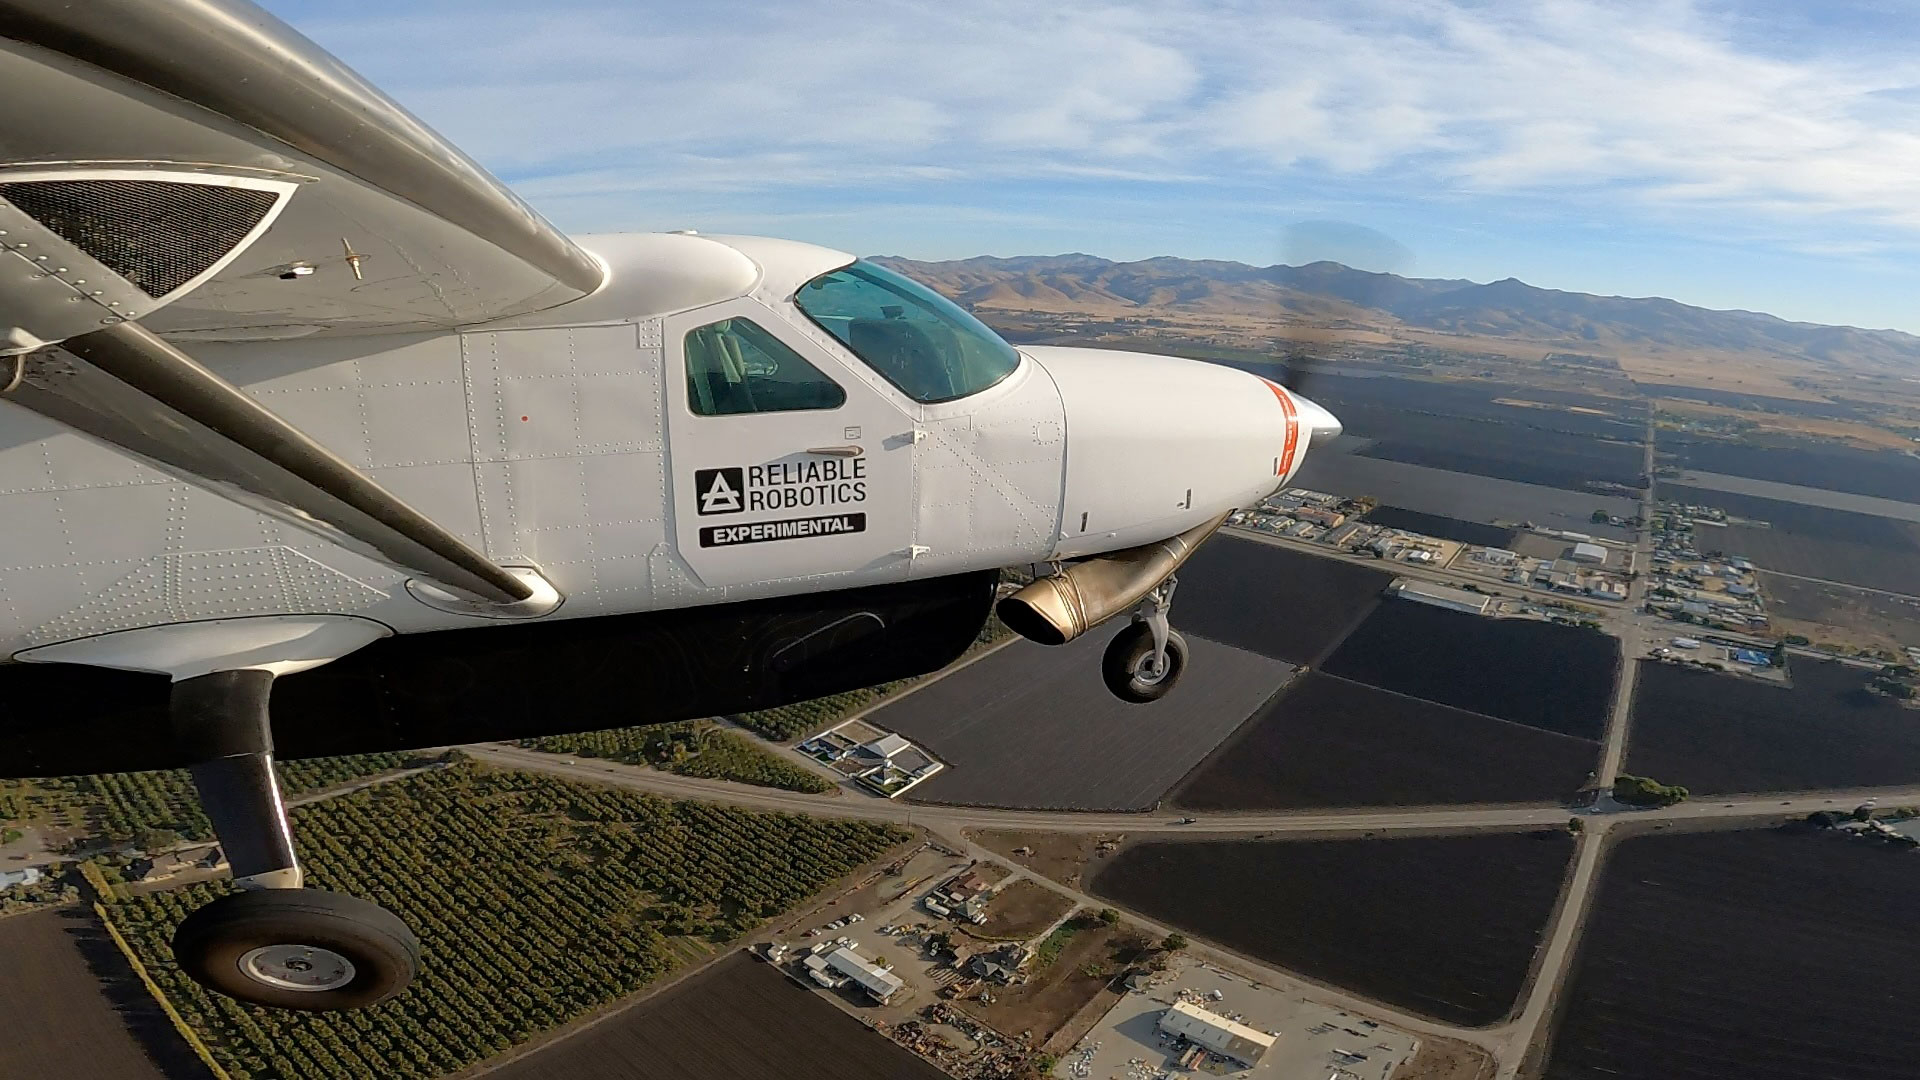 Reliable Robotics remotely operates a Cessna 208B Caravan with no one on board in Hollister, CA